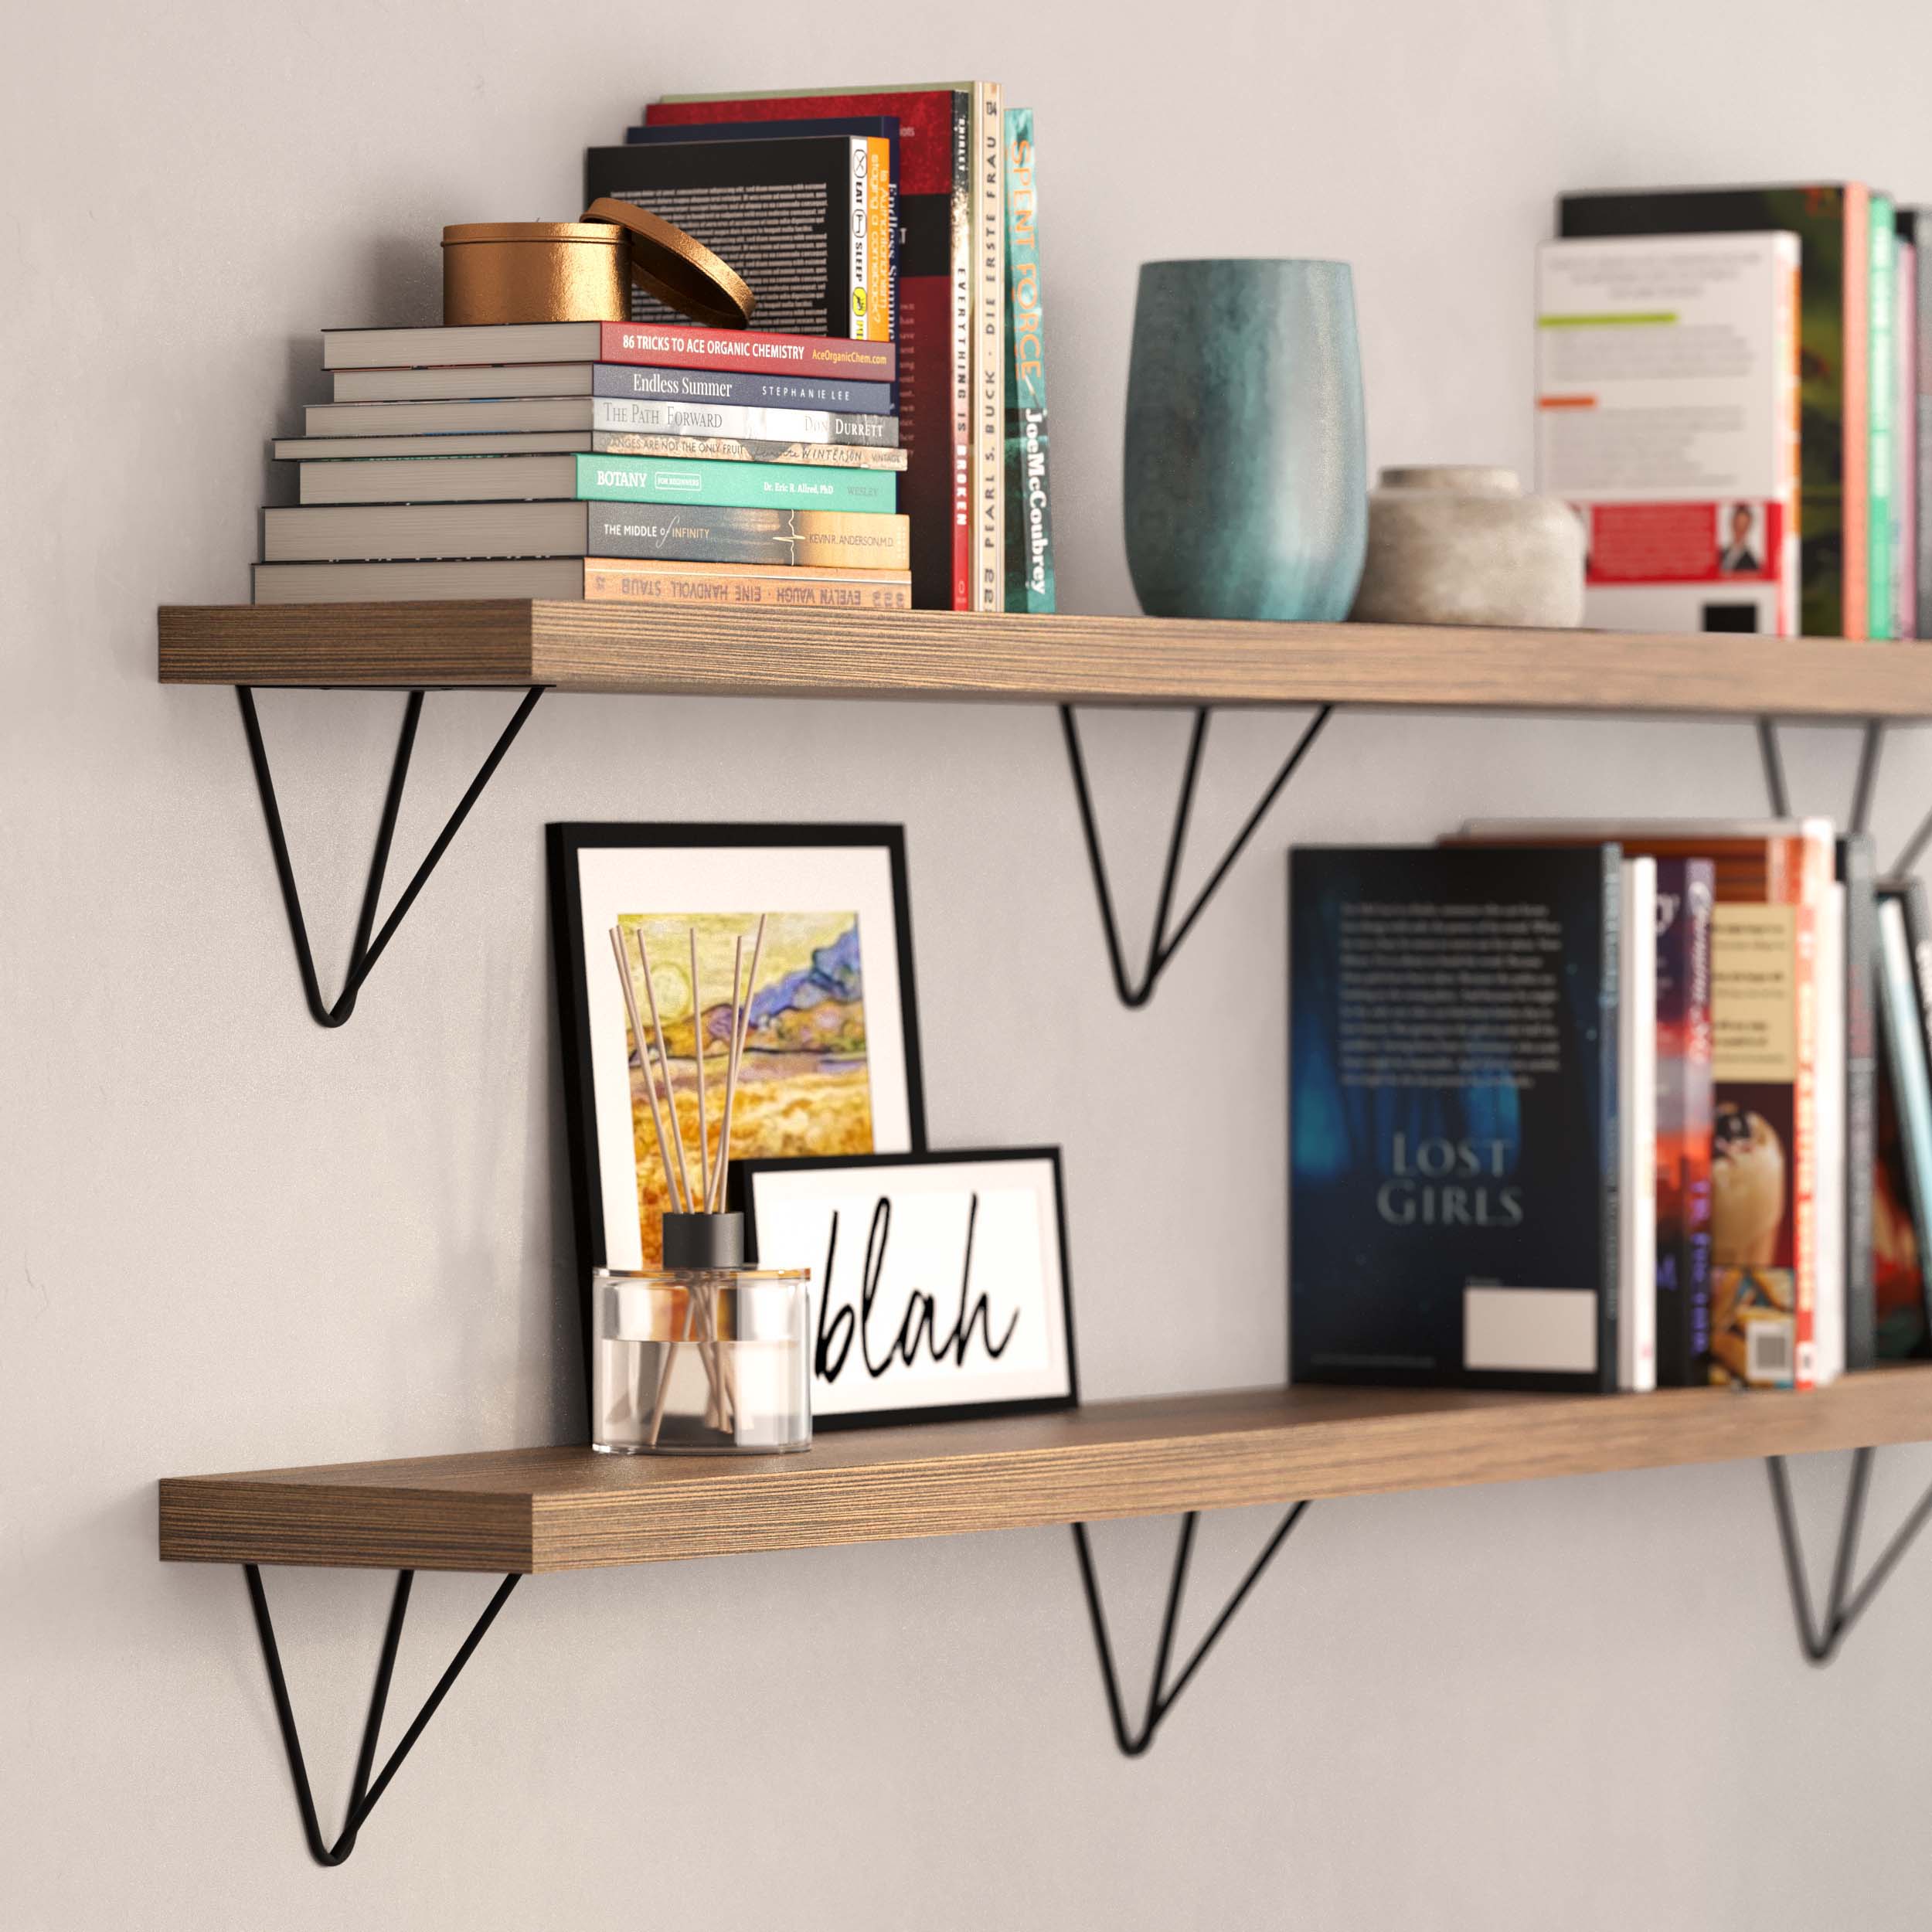 Close-up of long bookshelves supported by black triangular industrial brackets, displaying books and decor.